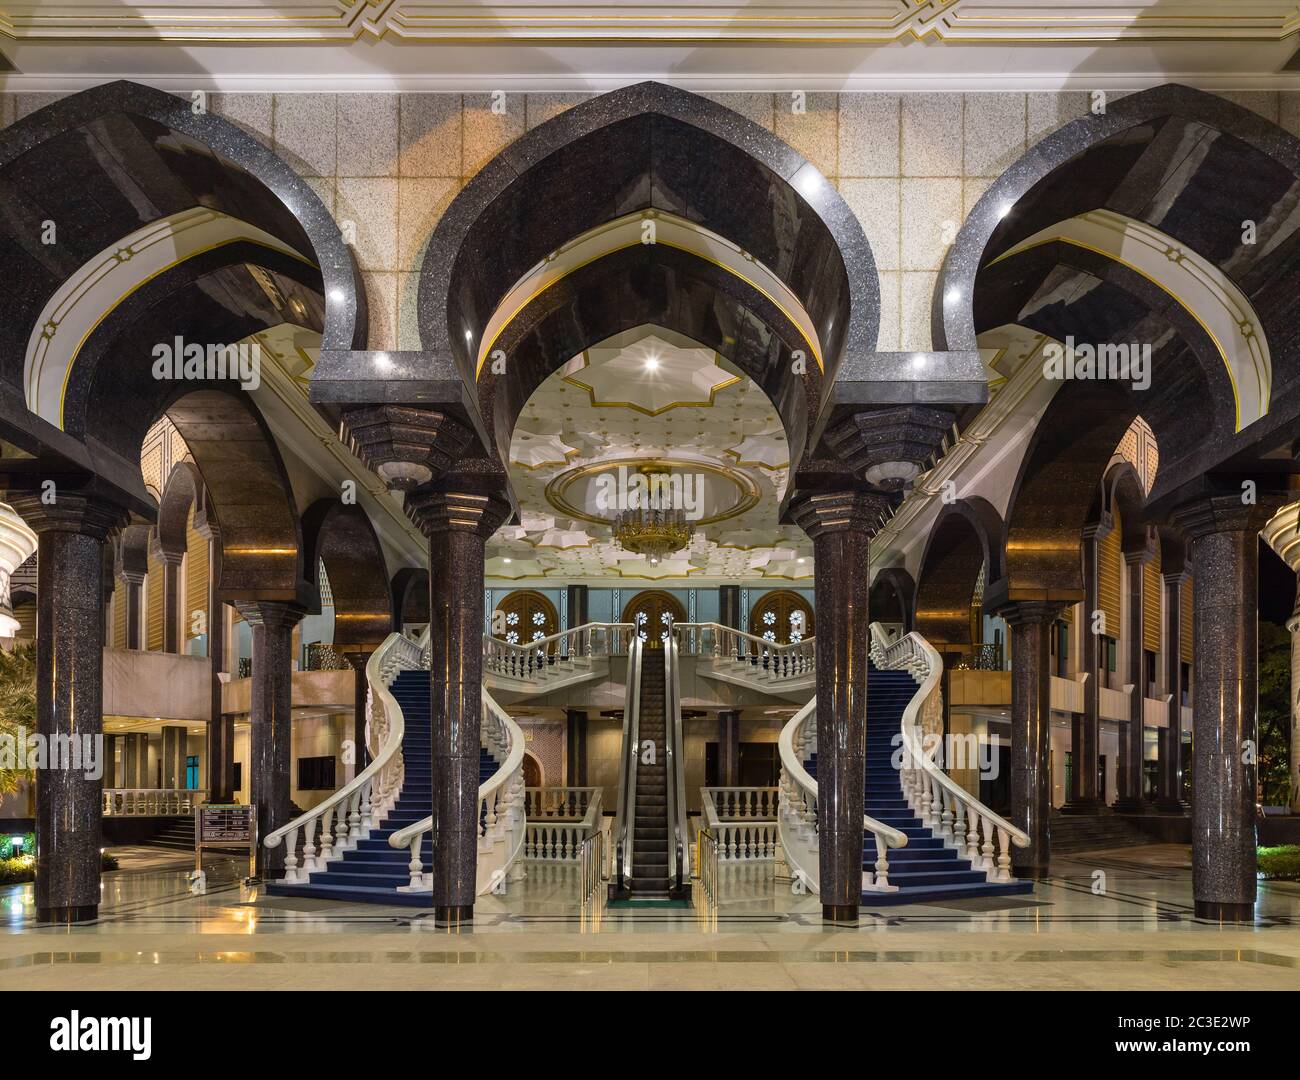 Staircase to Jame' Asr Hassanil Bolkiah Mosque at the entrance for His Royal Highness, Ministers and VIP in Bandar Seri Begawan, Brunei Darussalam Stock Photo